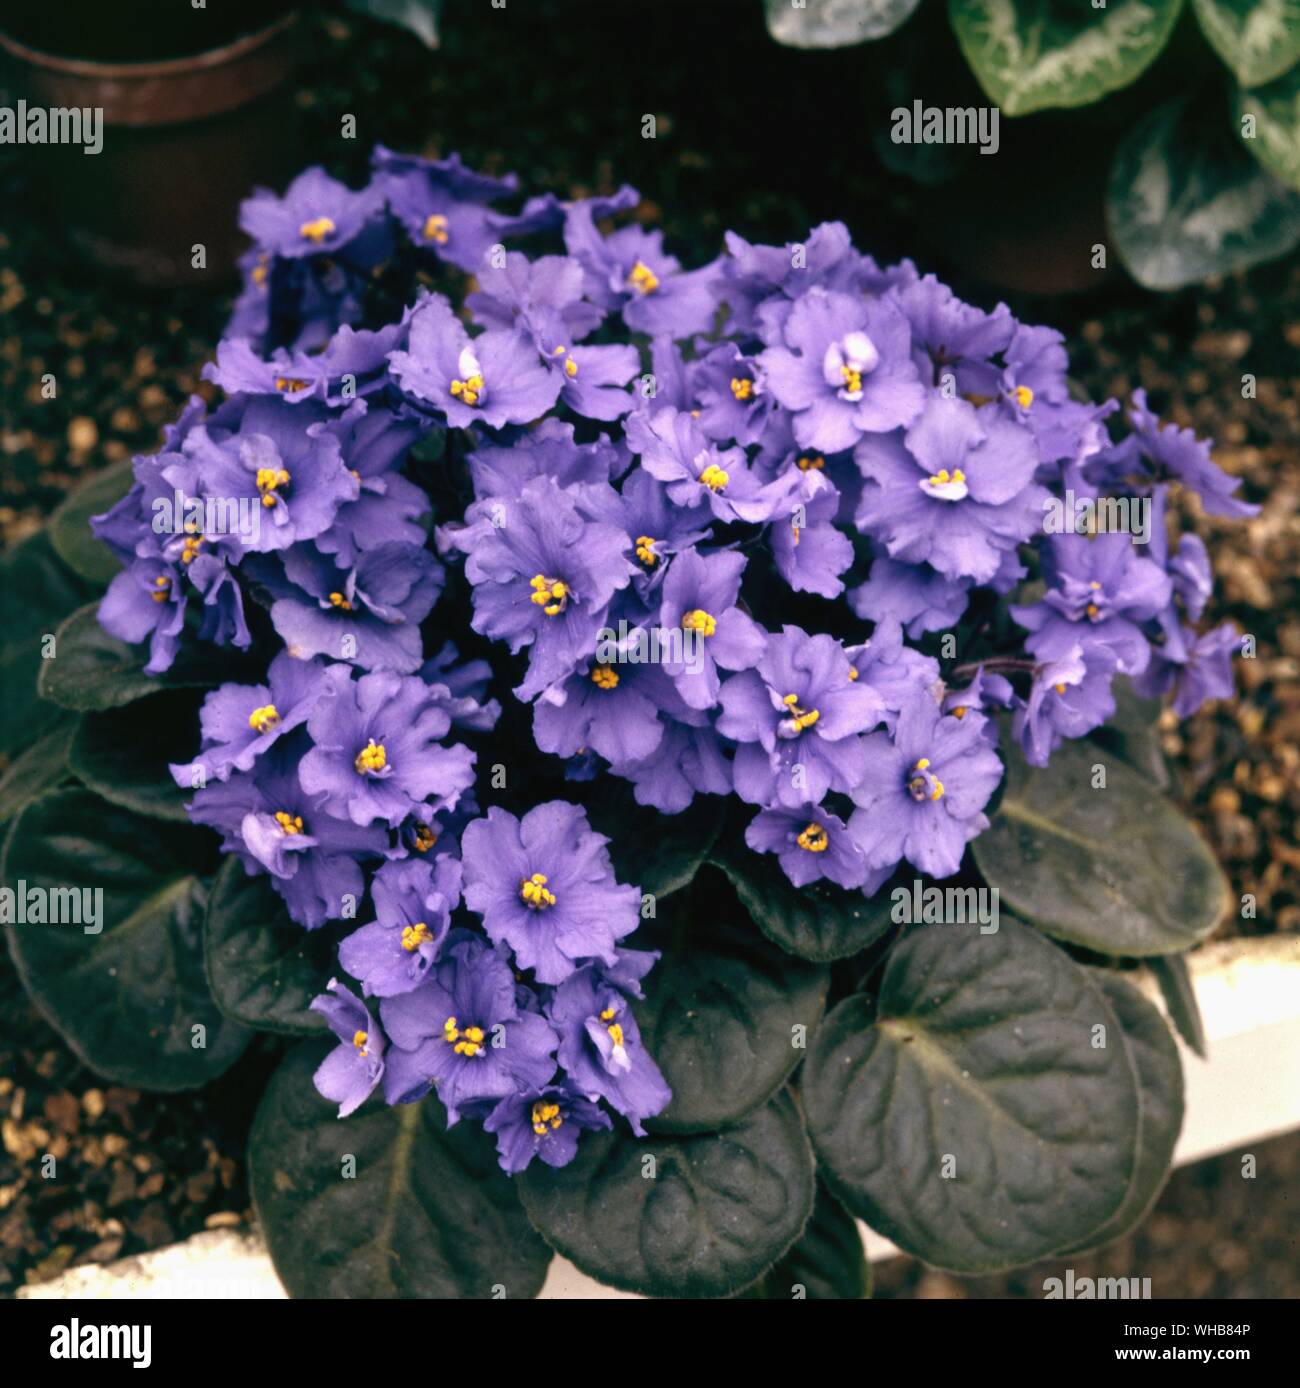 Saintpulia Rhapsody deep blue - commonly known as African violet, is a genus of species of herbaceous perennial flowering plants in the Gesneriaceae family, native to Tanzania, and named after Baron Walter von Saint Paul (1860-1910) who discovered the plant in Tanganyika (Tanzania) in Africa.. Stock Photo